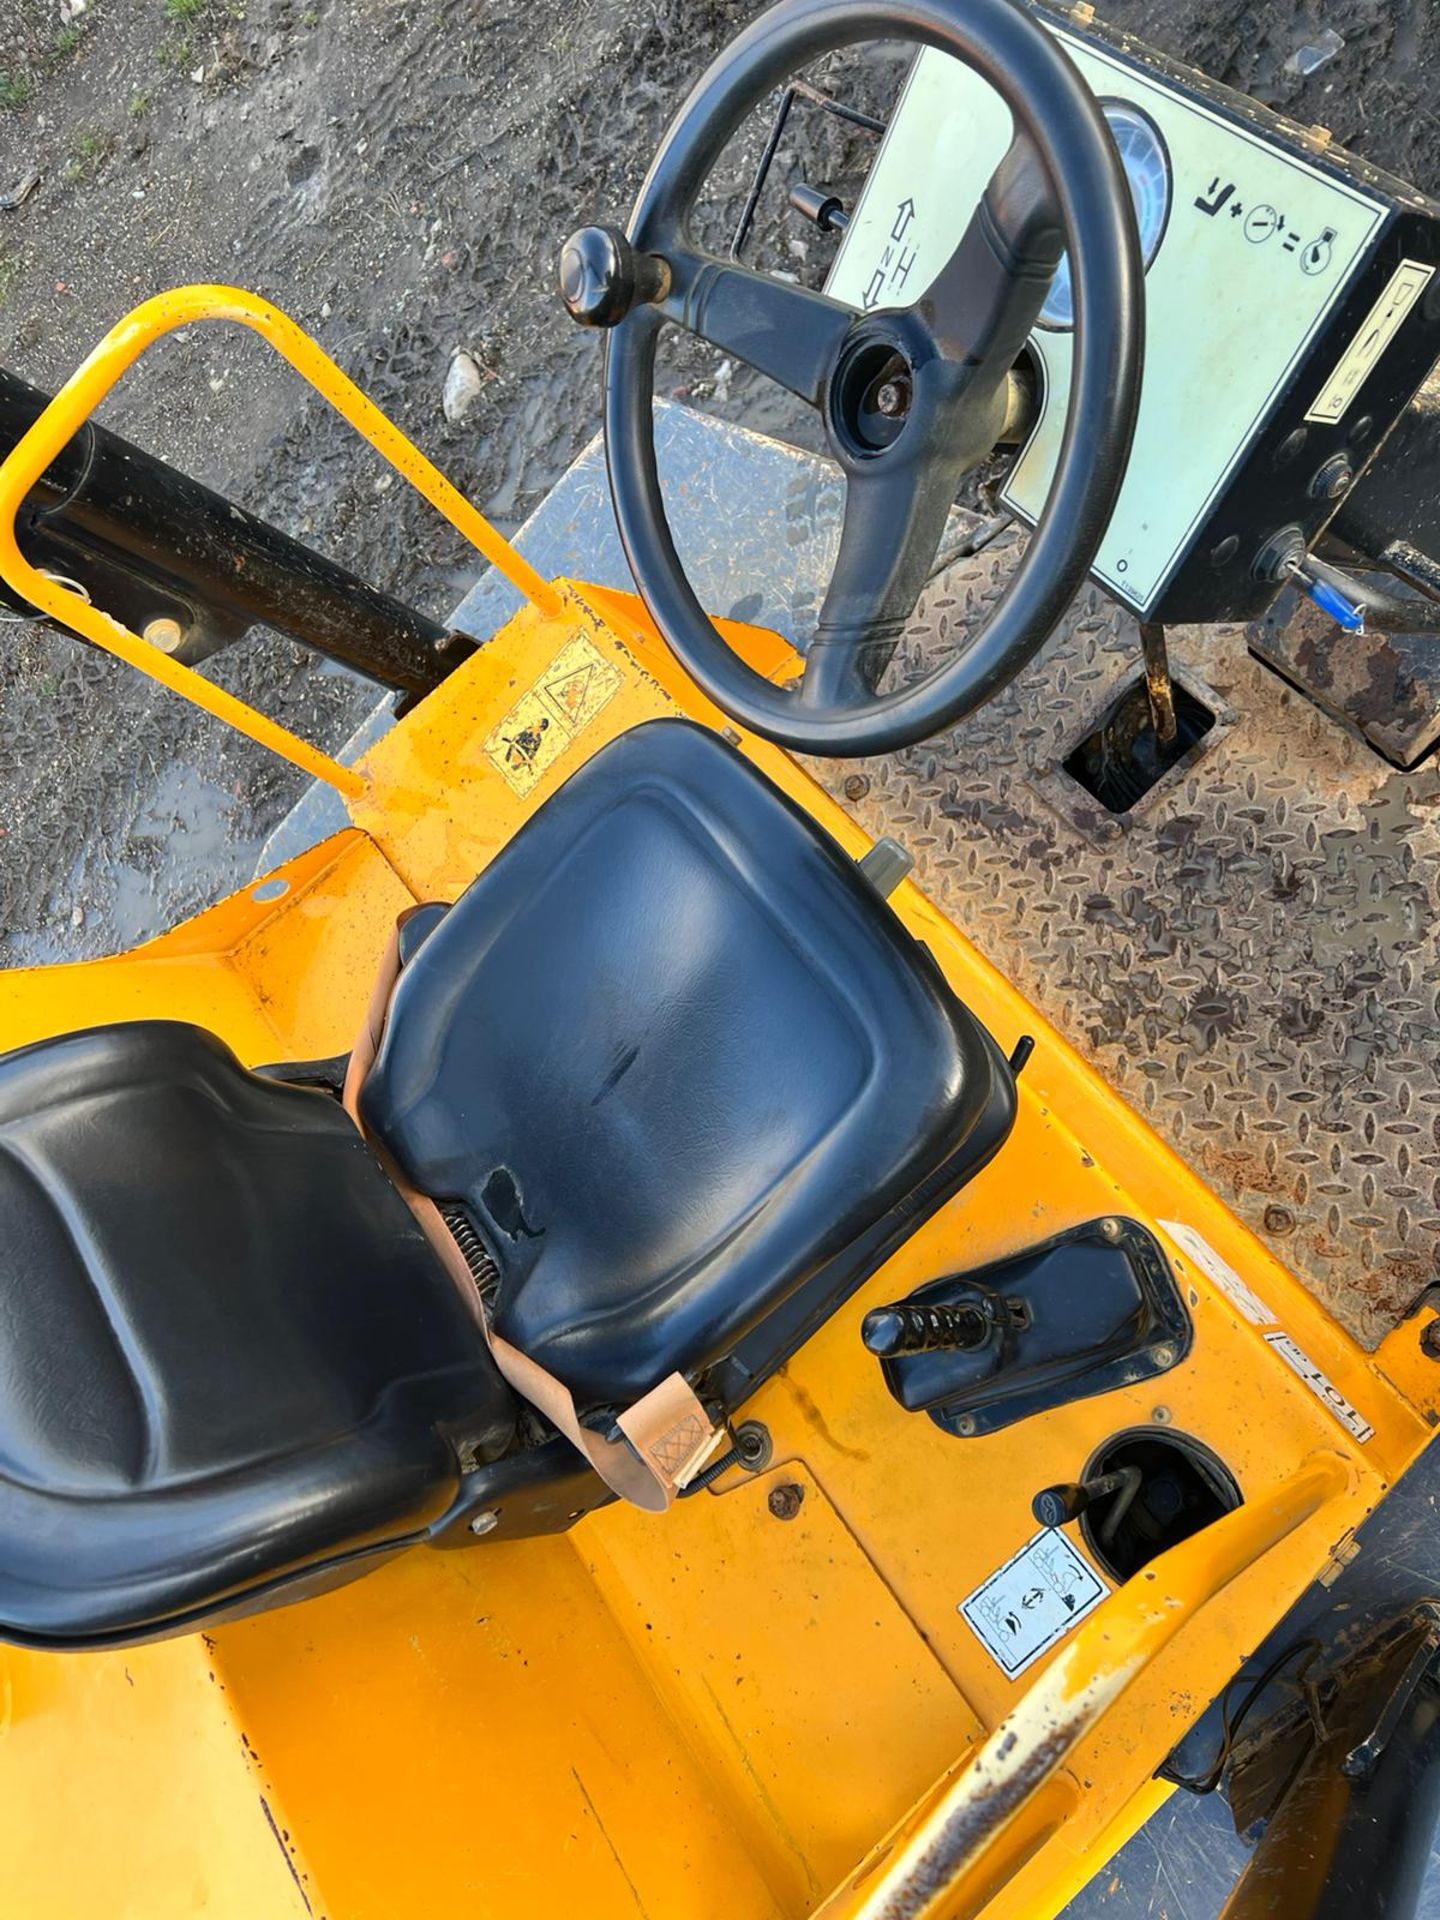 2017 MECALAC TA6 4WD 6 TON DUMPER, RUSN DRIVES AND TIPS, SHOWING A LOW 1273 HOURS *PLUS VAT* - Image 11 of 12